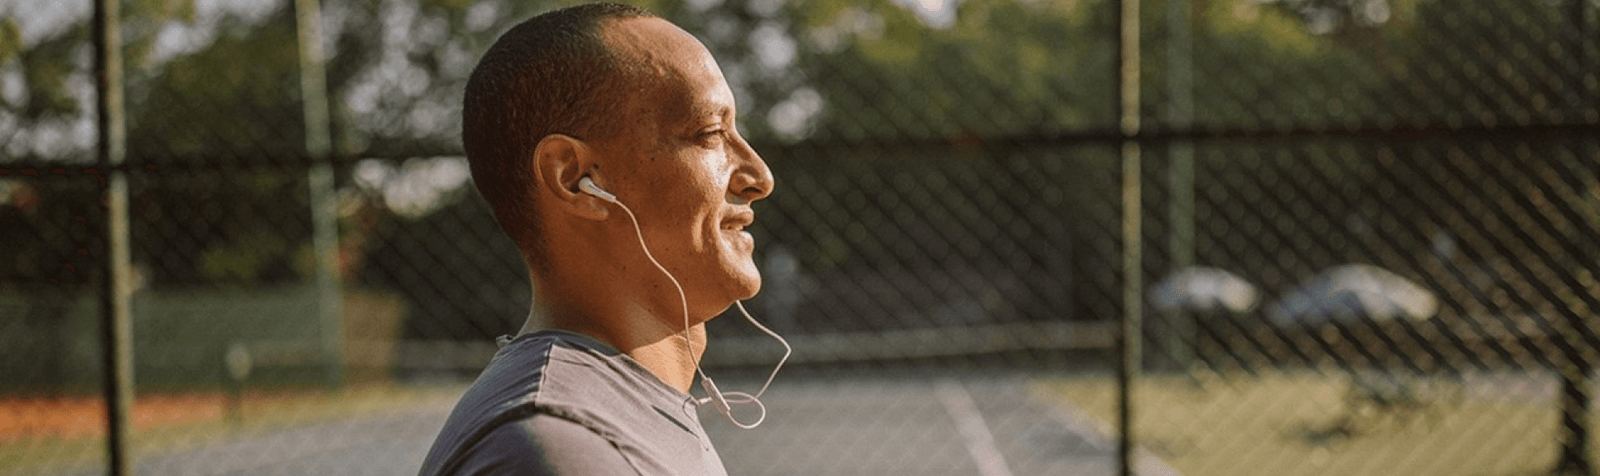 Man jogging outside with corded headphones